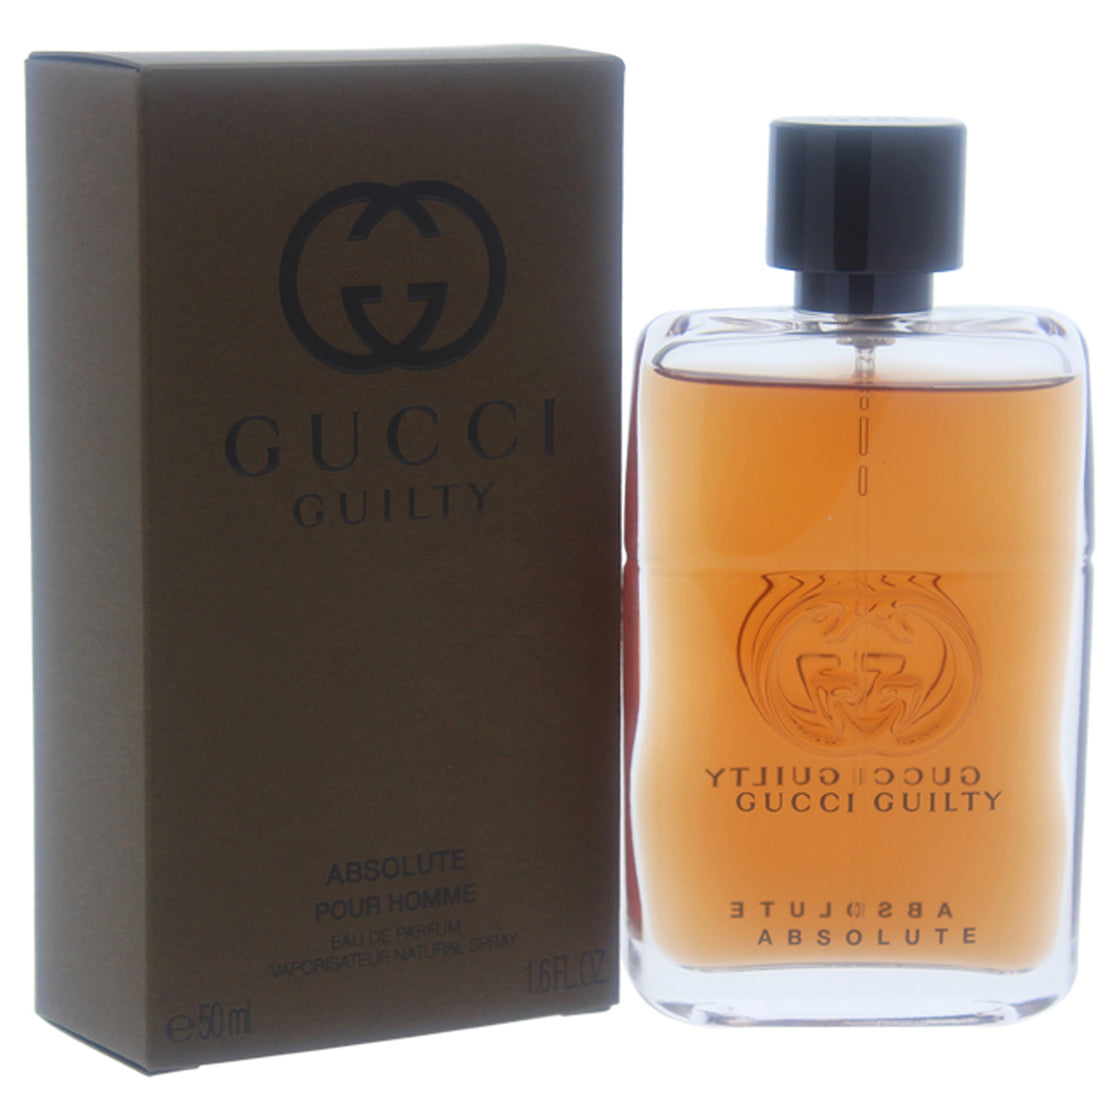 Gucci Guilty Absolute by Gucci for Men - 1.6 oz EDP Spray